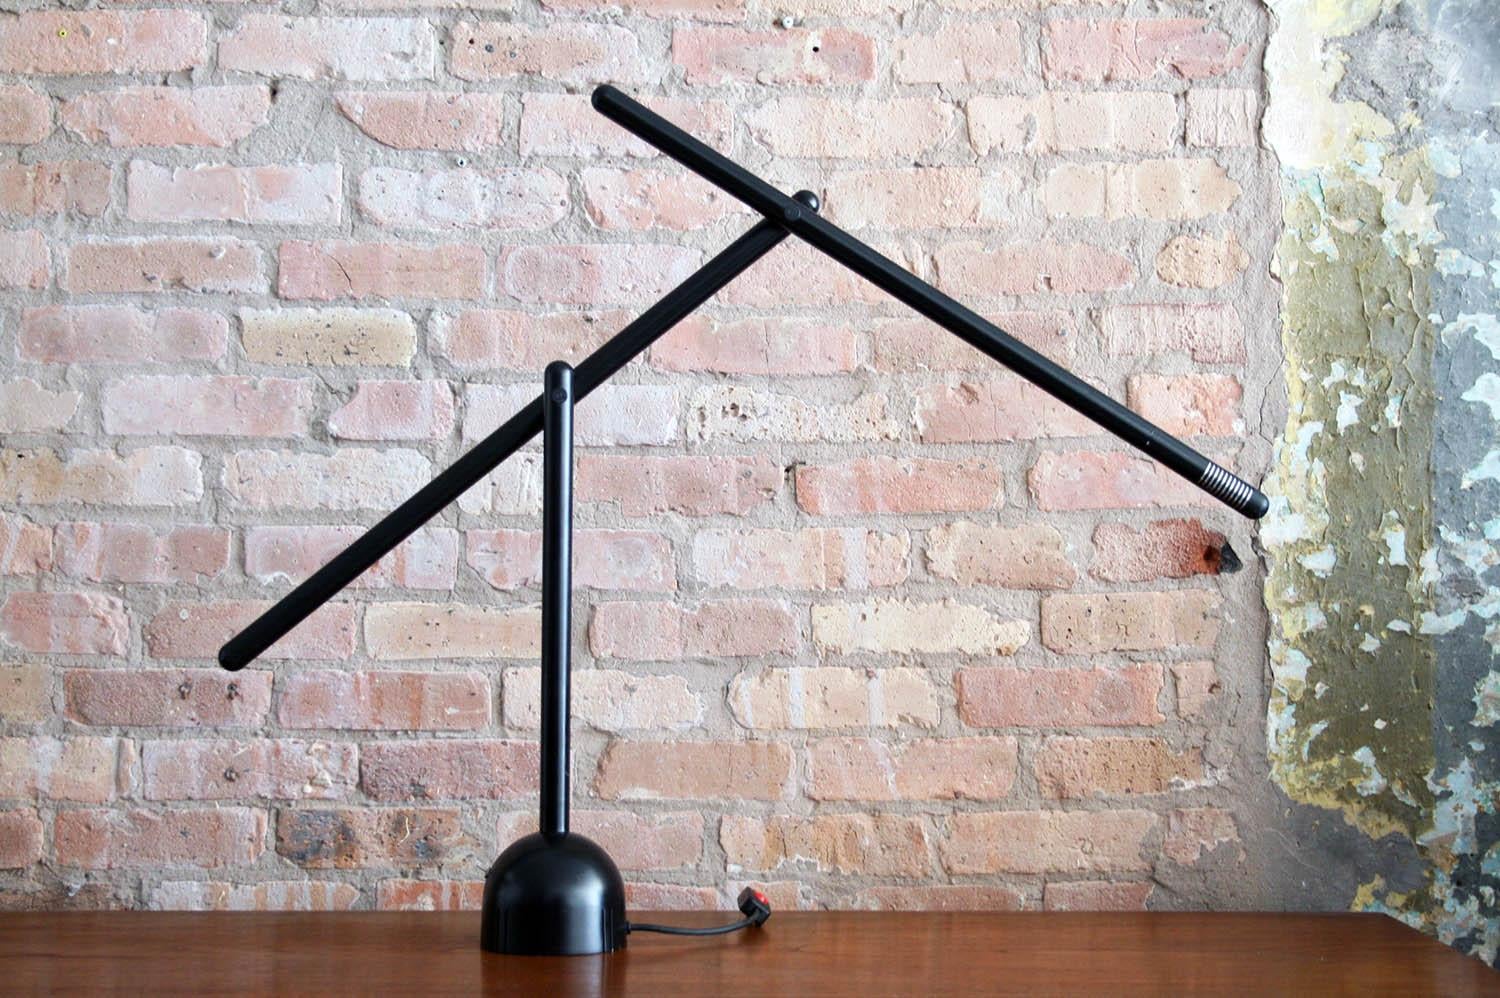 This is a mira table lamp designed by Mario Arnaboldi. Production of this lamp was very limited. This piece is in black enameled metal. Its arms can be adjusted and moved into a variety of positions emphasizing the angular aspects of the design.